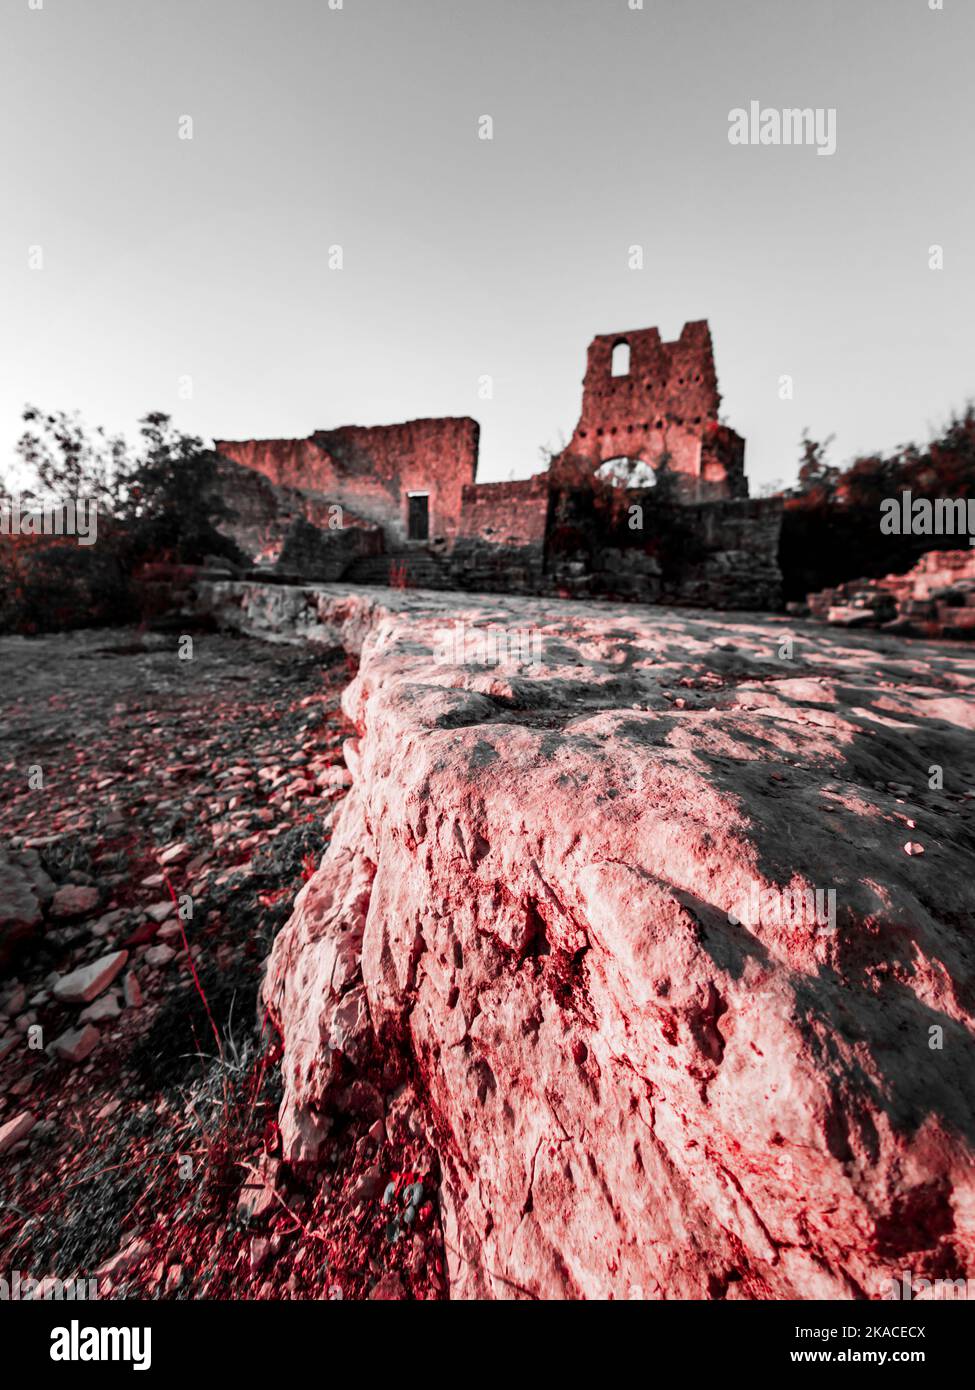 Remains of abandoned derelict old town Dvigrad in Istria Croatia Europe, creative artistic altered color, close up detail closeup blurry background Stock Photo